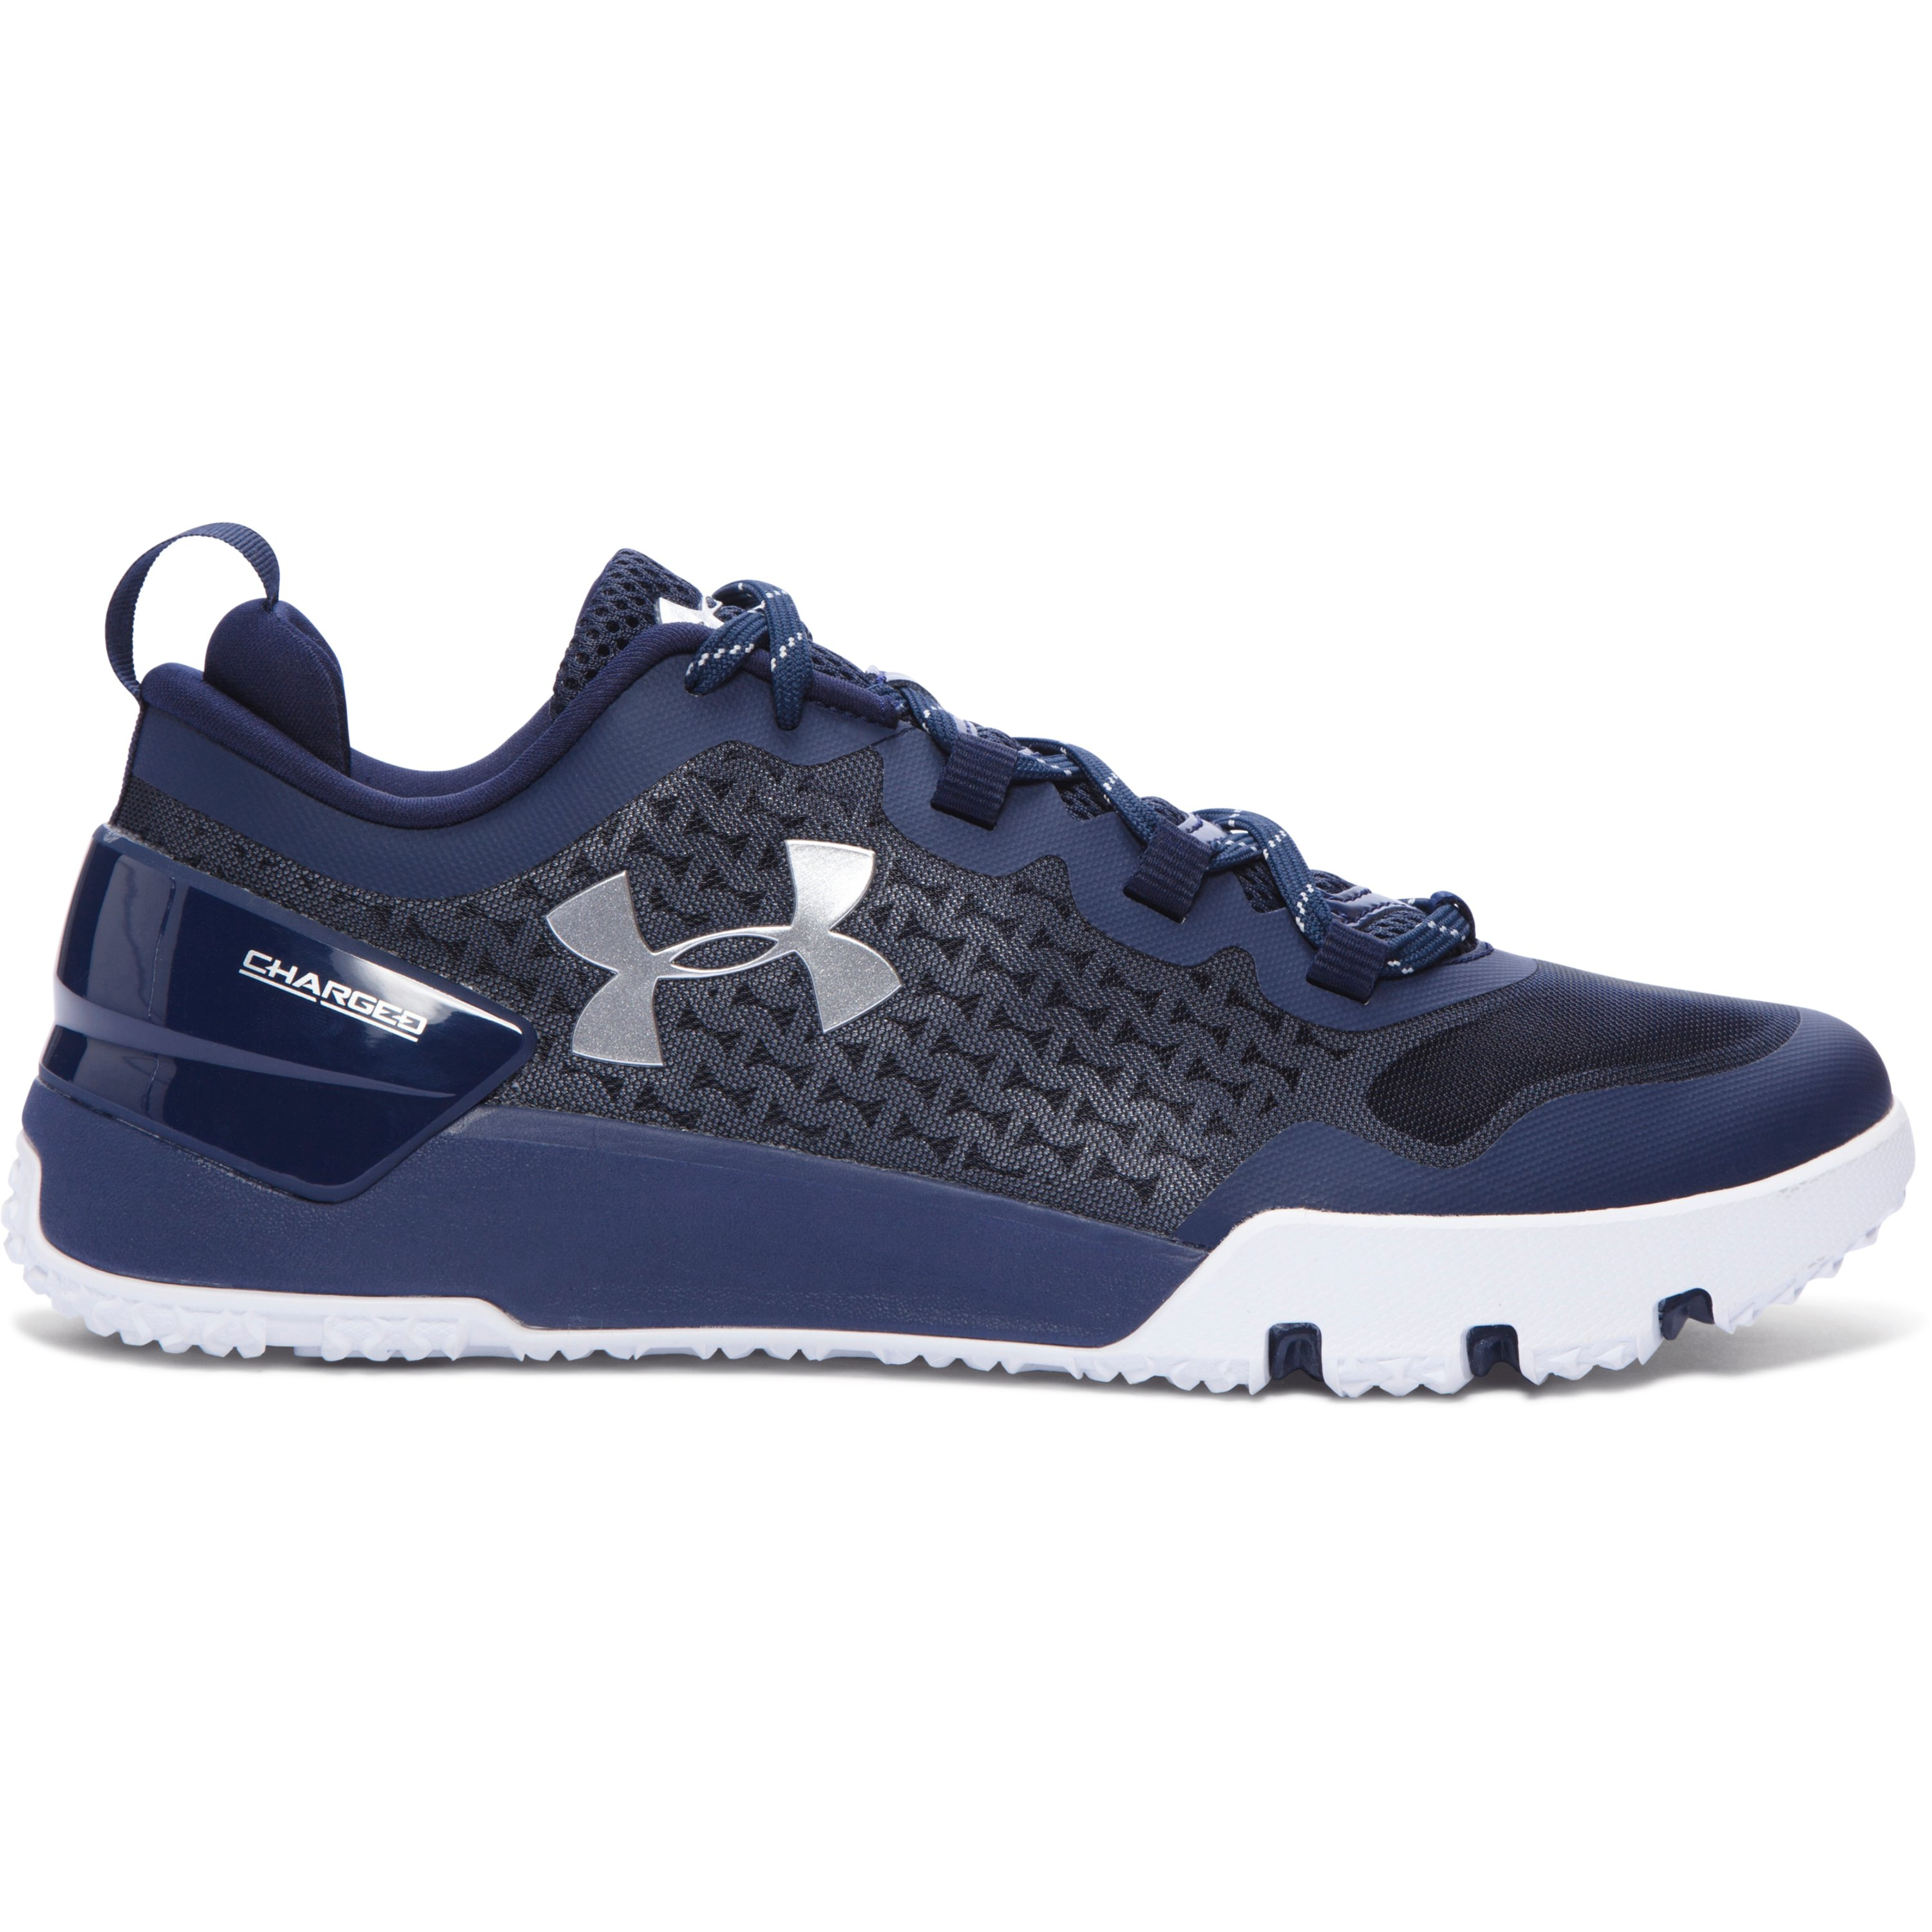 Lyst - Under Armour Men’s Ua Charged Ultimate Team Training Shoes in ...